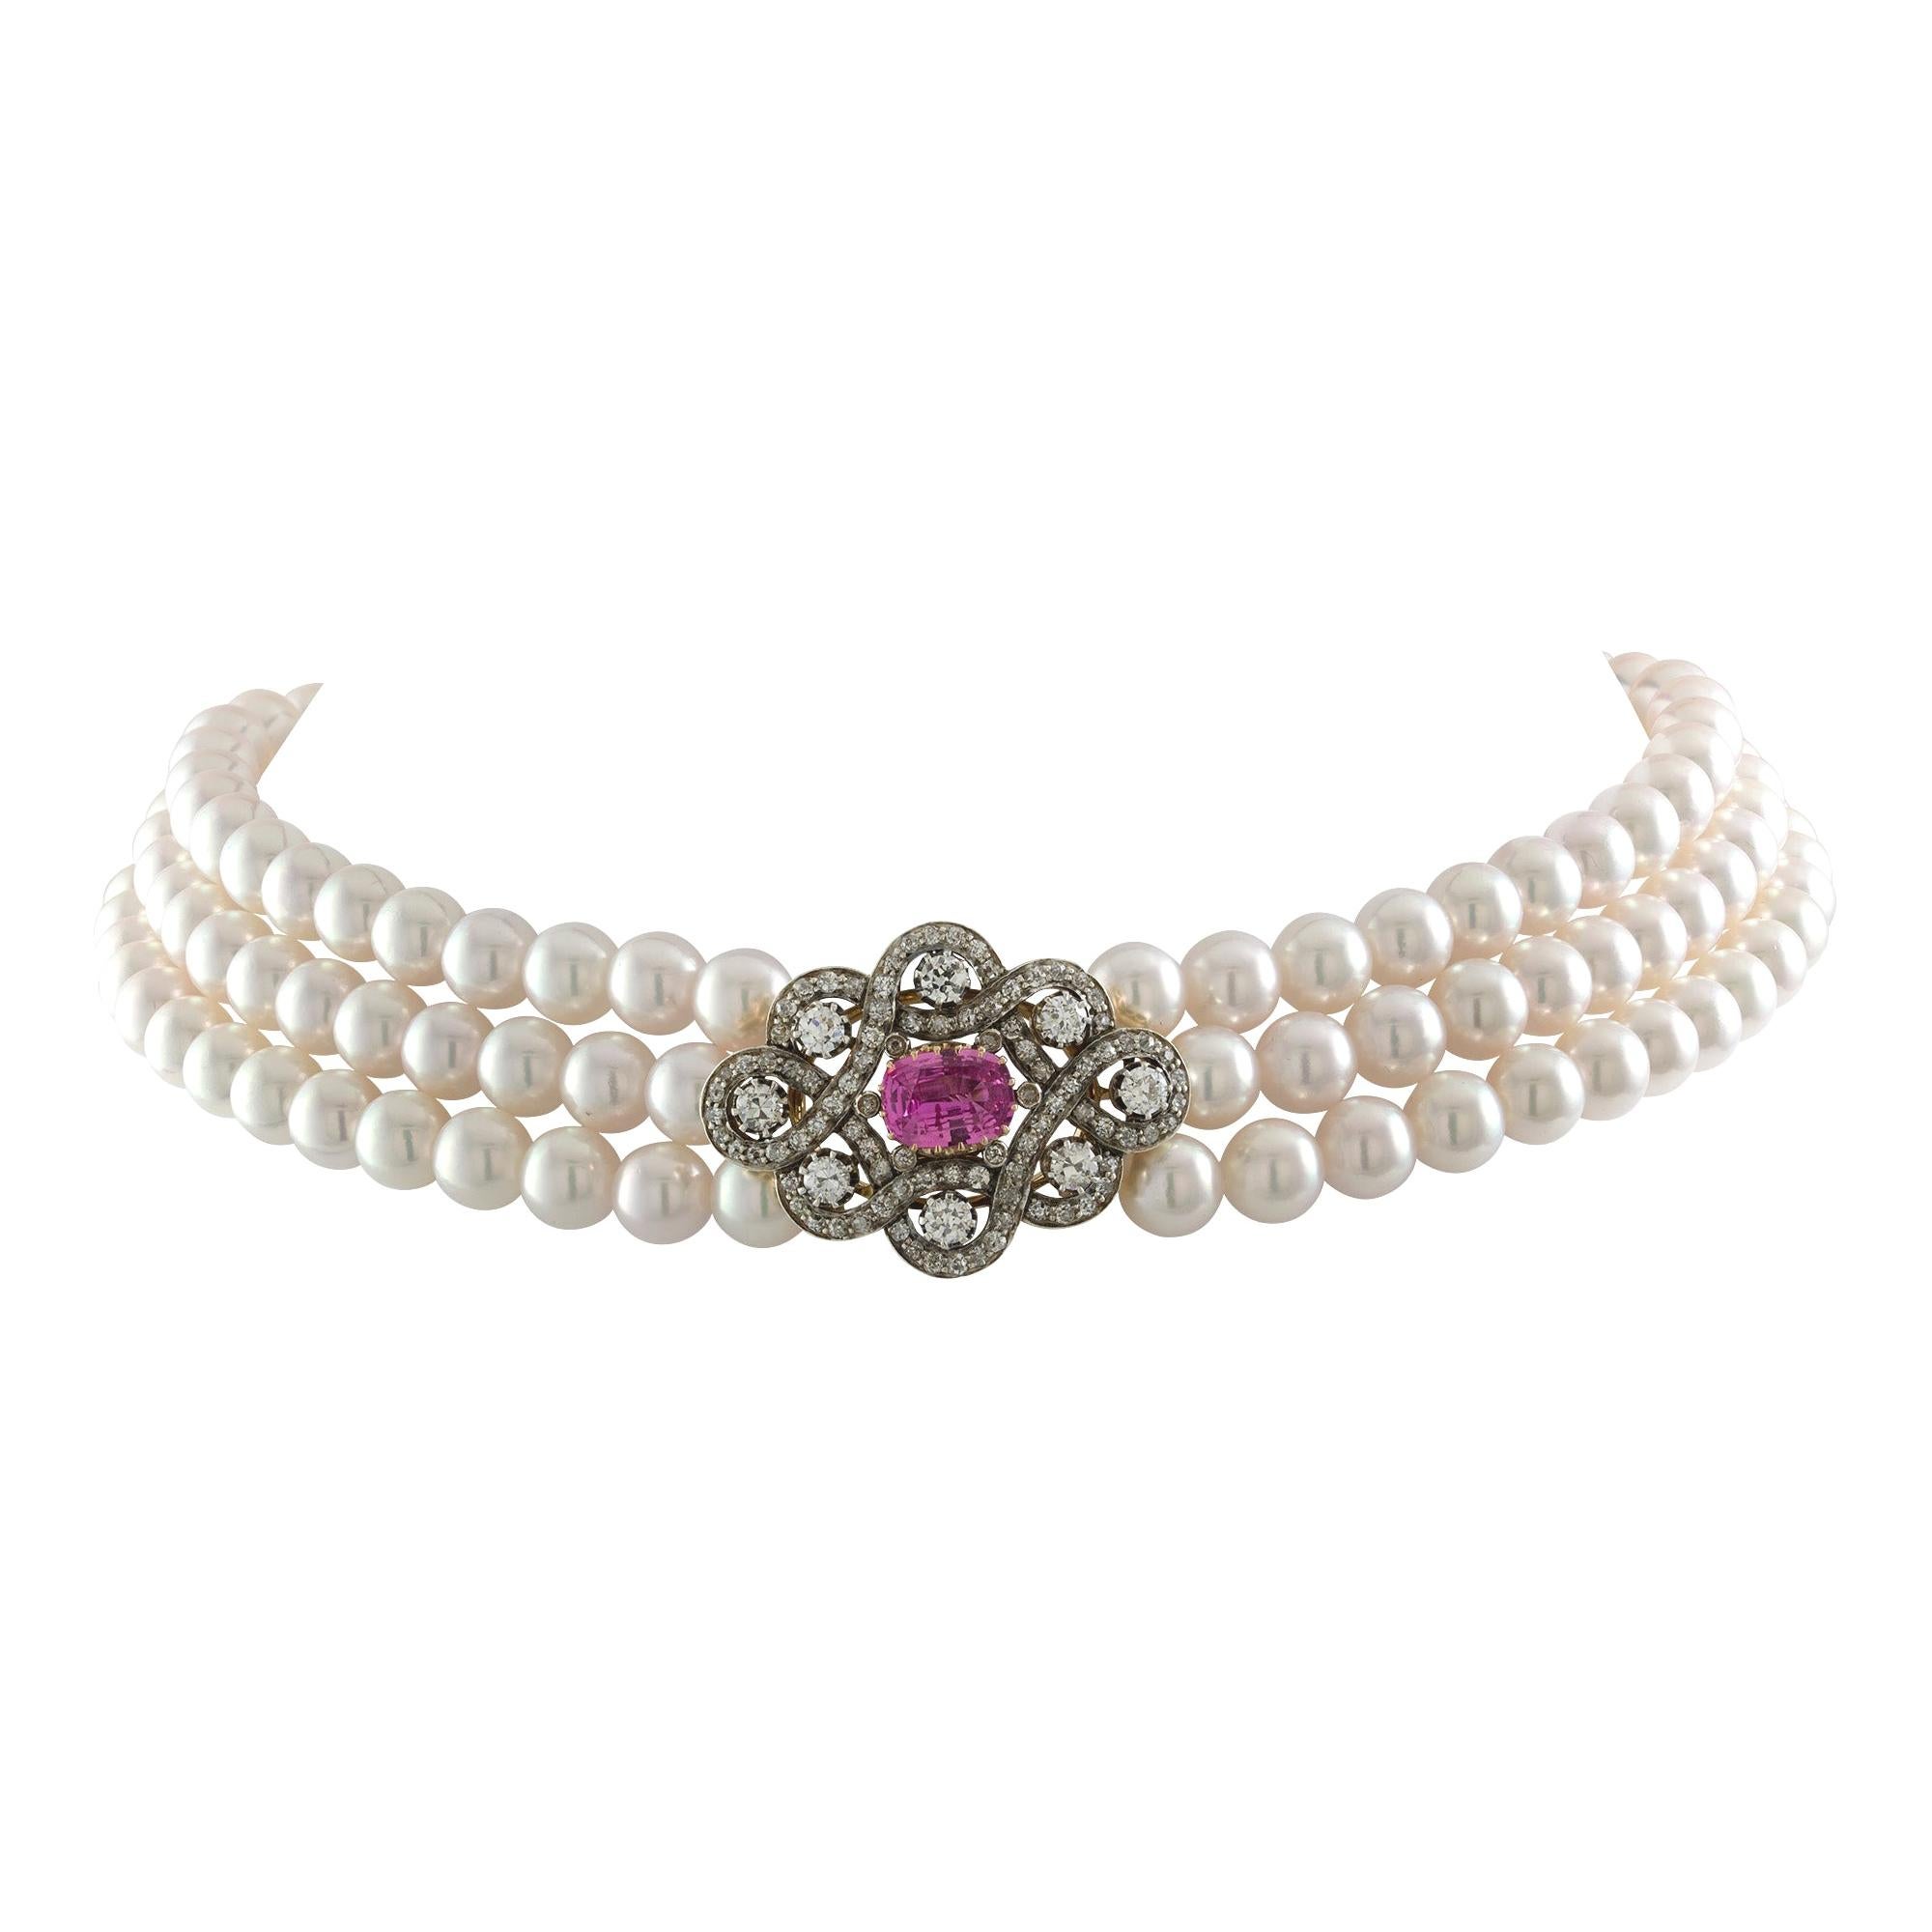 A Pink Sapphire, Diamond and Cultured Pearl Necklace